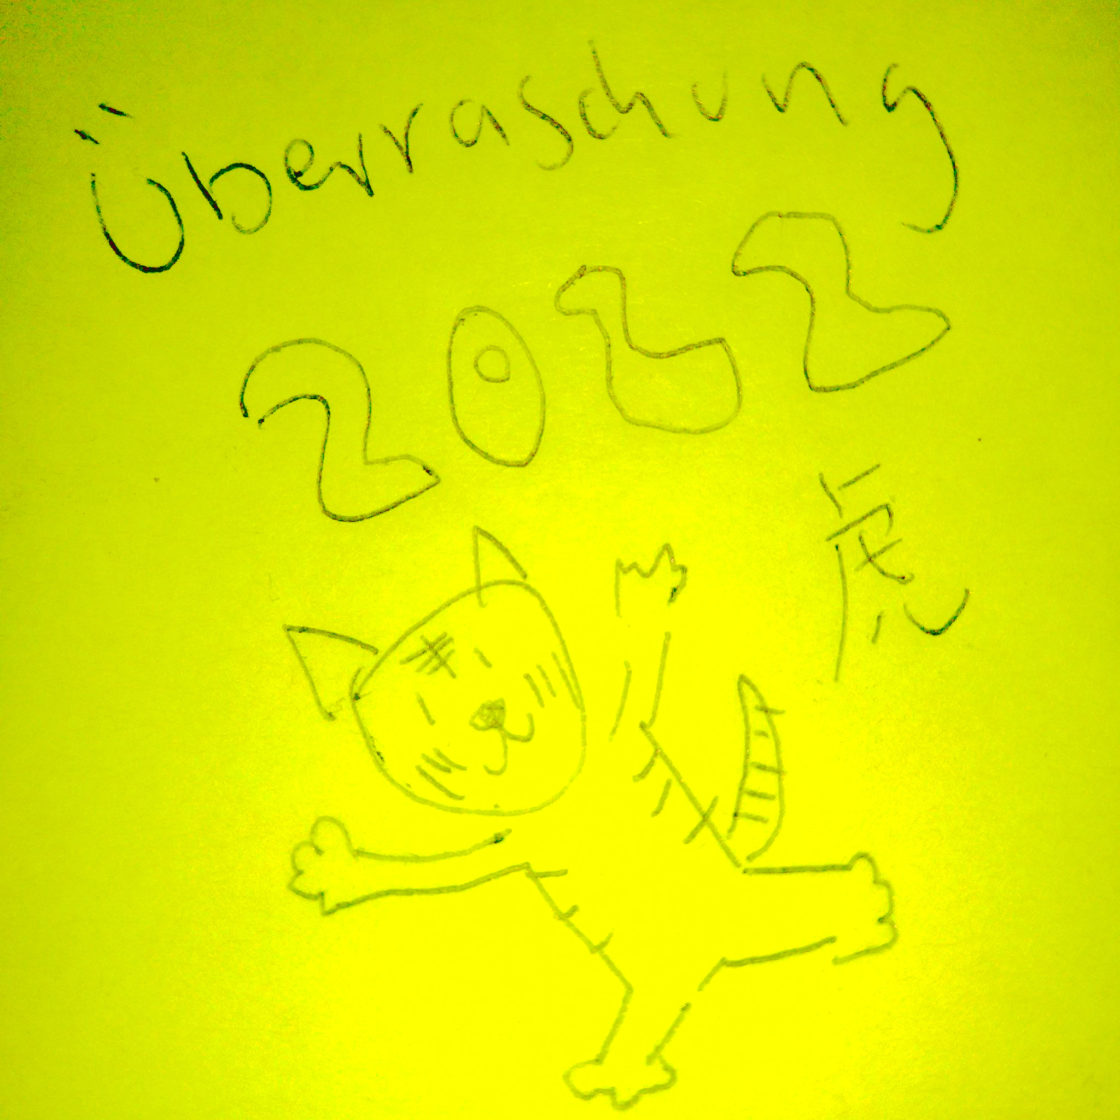 yellow background, drawing of a smiling tiger with black ballpoint pen. "Überraschung 2022"